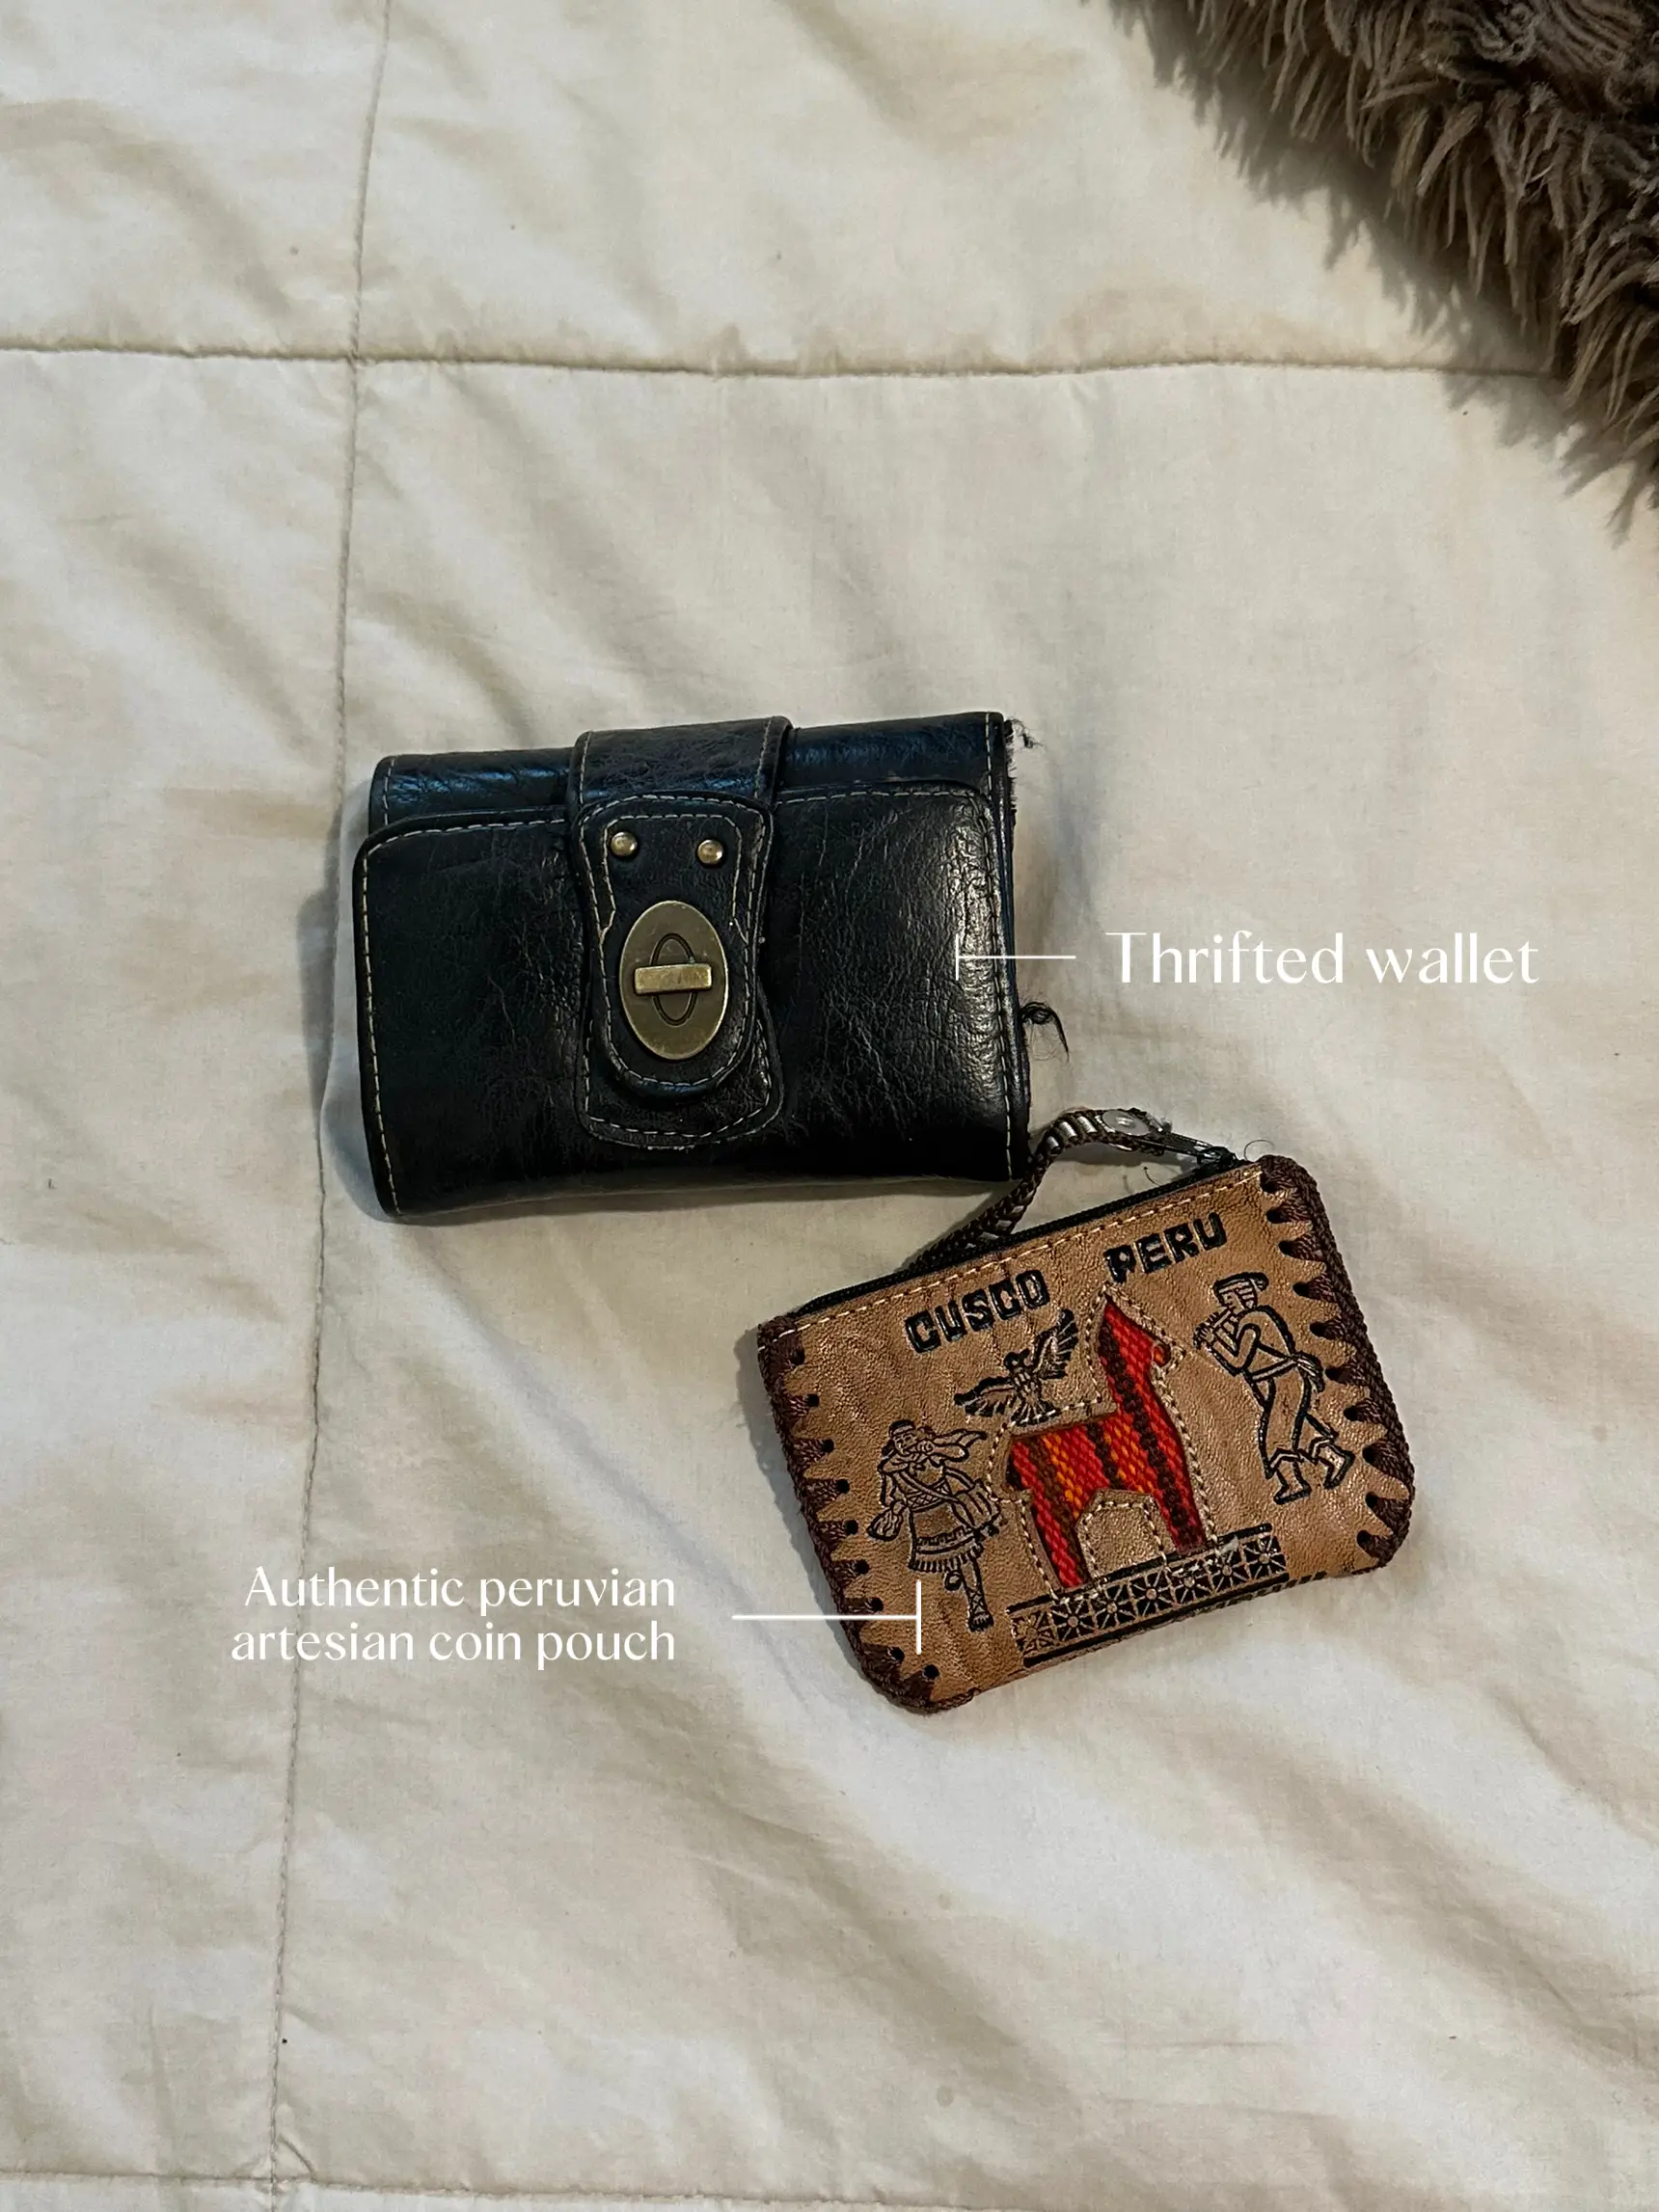 Secret Stash Undercover Bra Wallet Miniature Travel Wallet for Her With  RFID Mirror Card -  UK